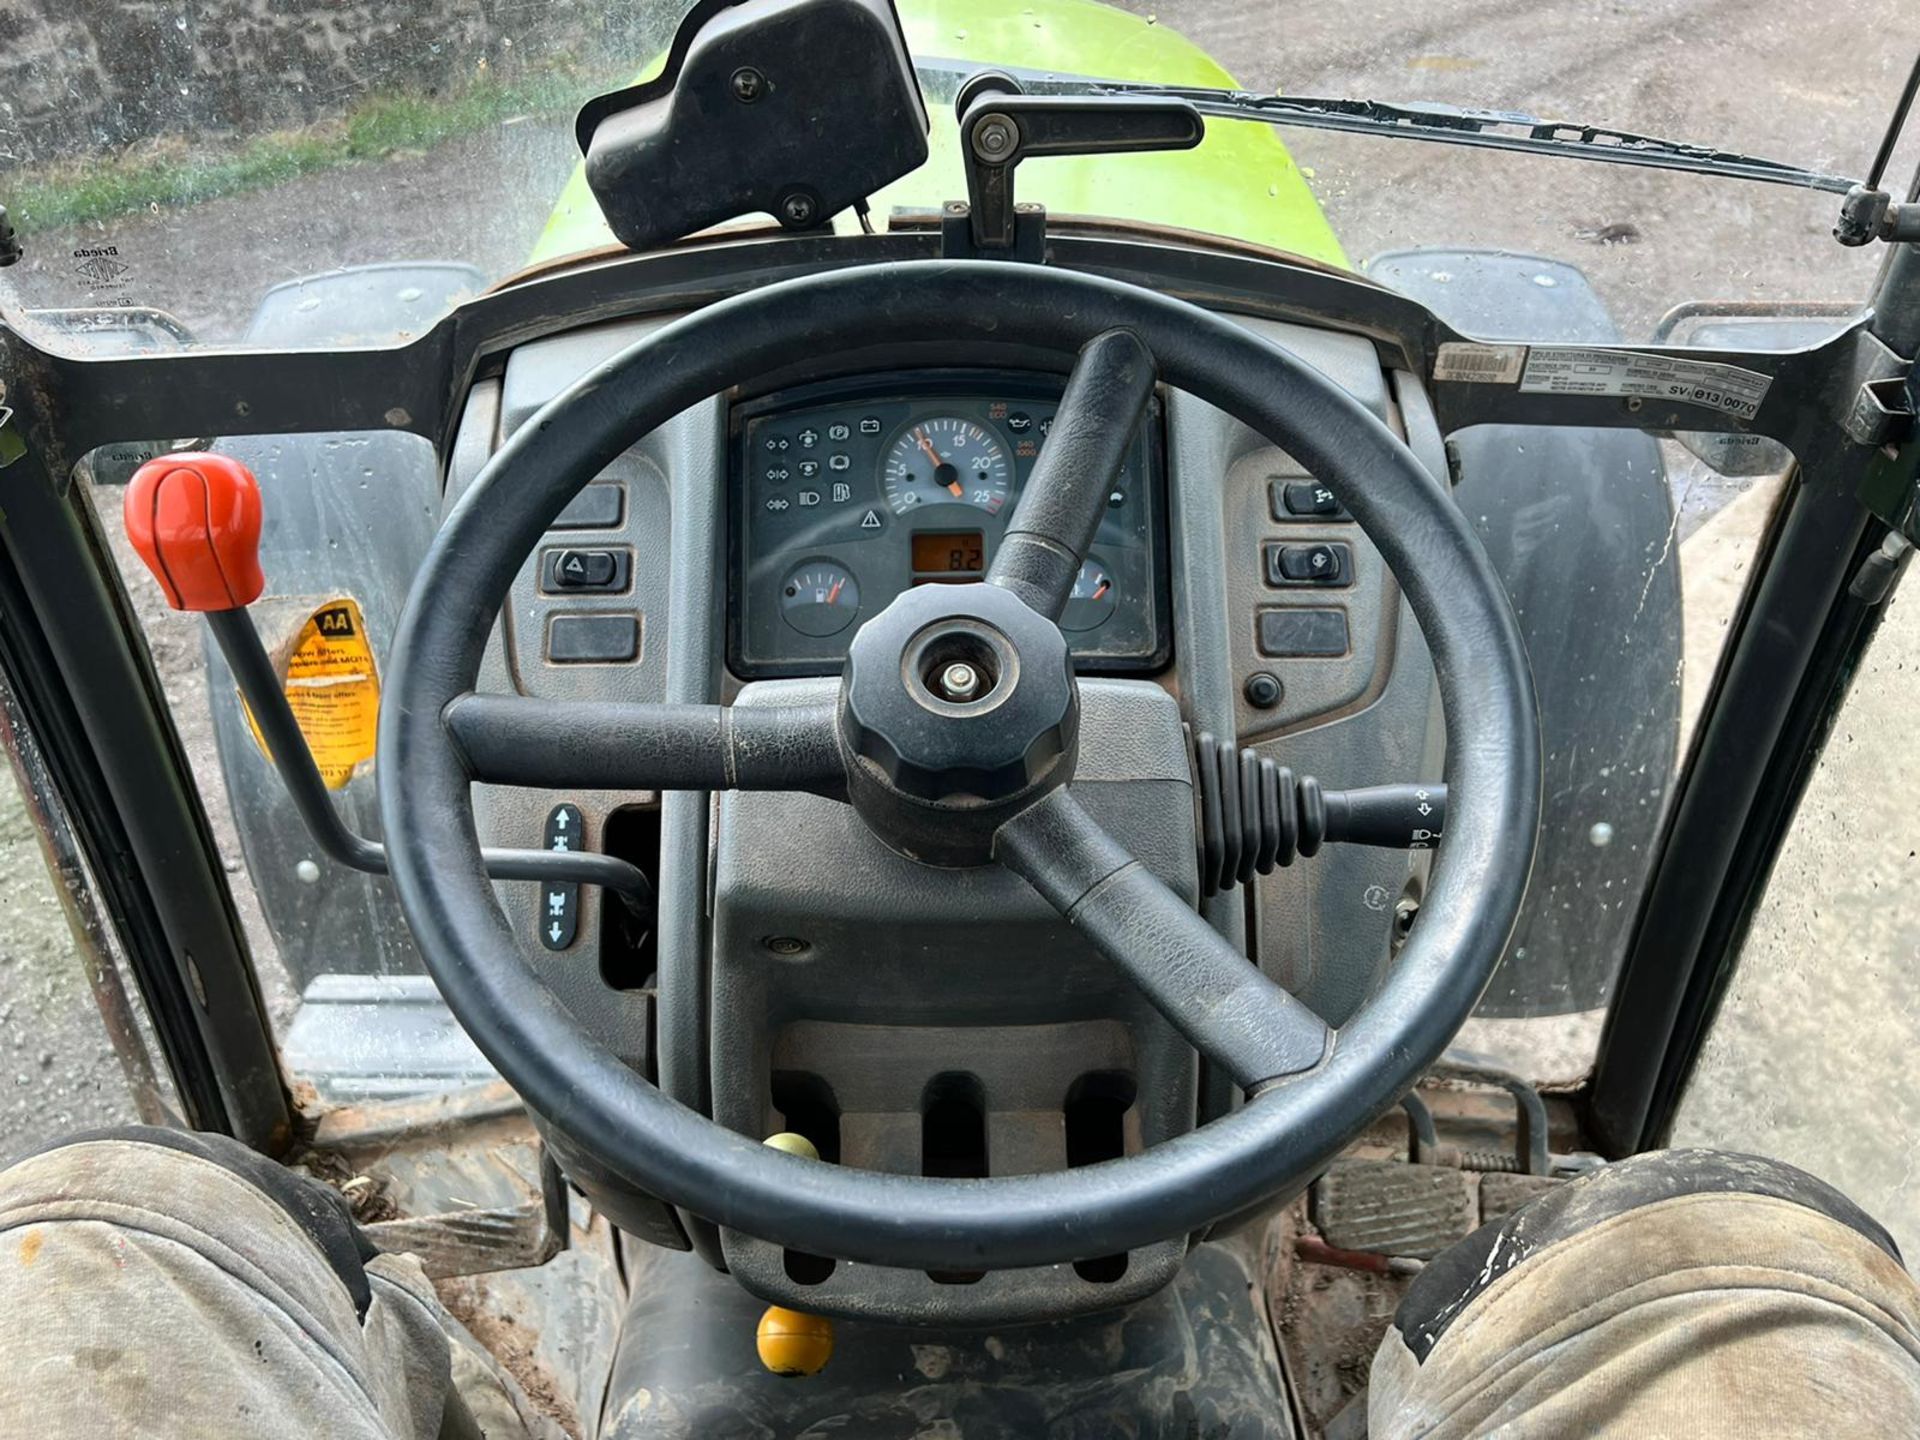 2008 Claas Nectis 267F 97HP 4WD Compact Tractor With Reco Ferri TIG 120 Hedge Cutter *PLUS VAT* - Image 10 of 25